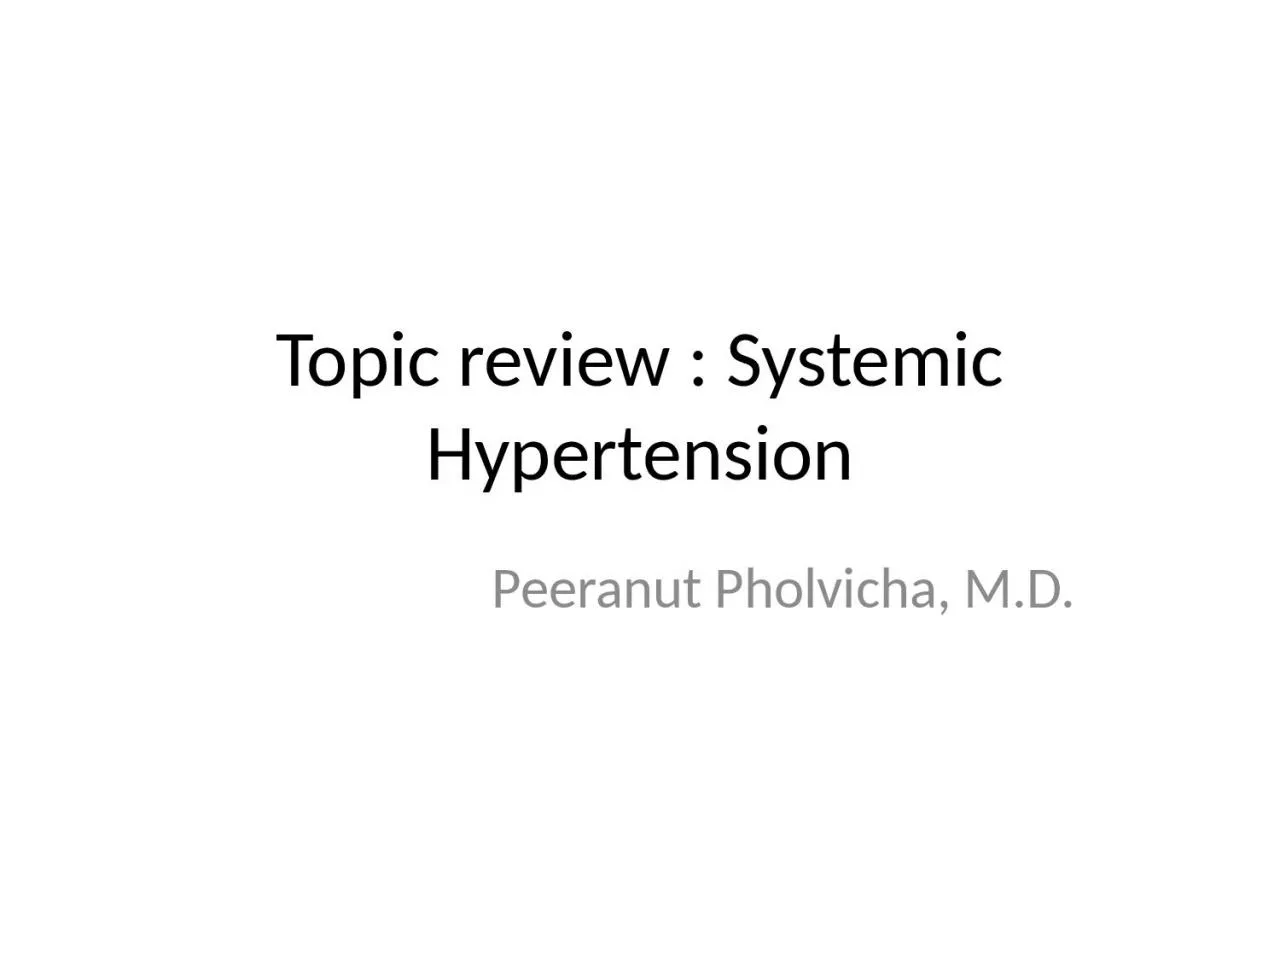 Topic review : Systemic Hypertension